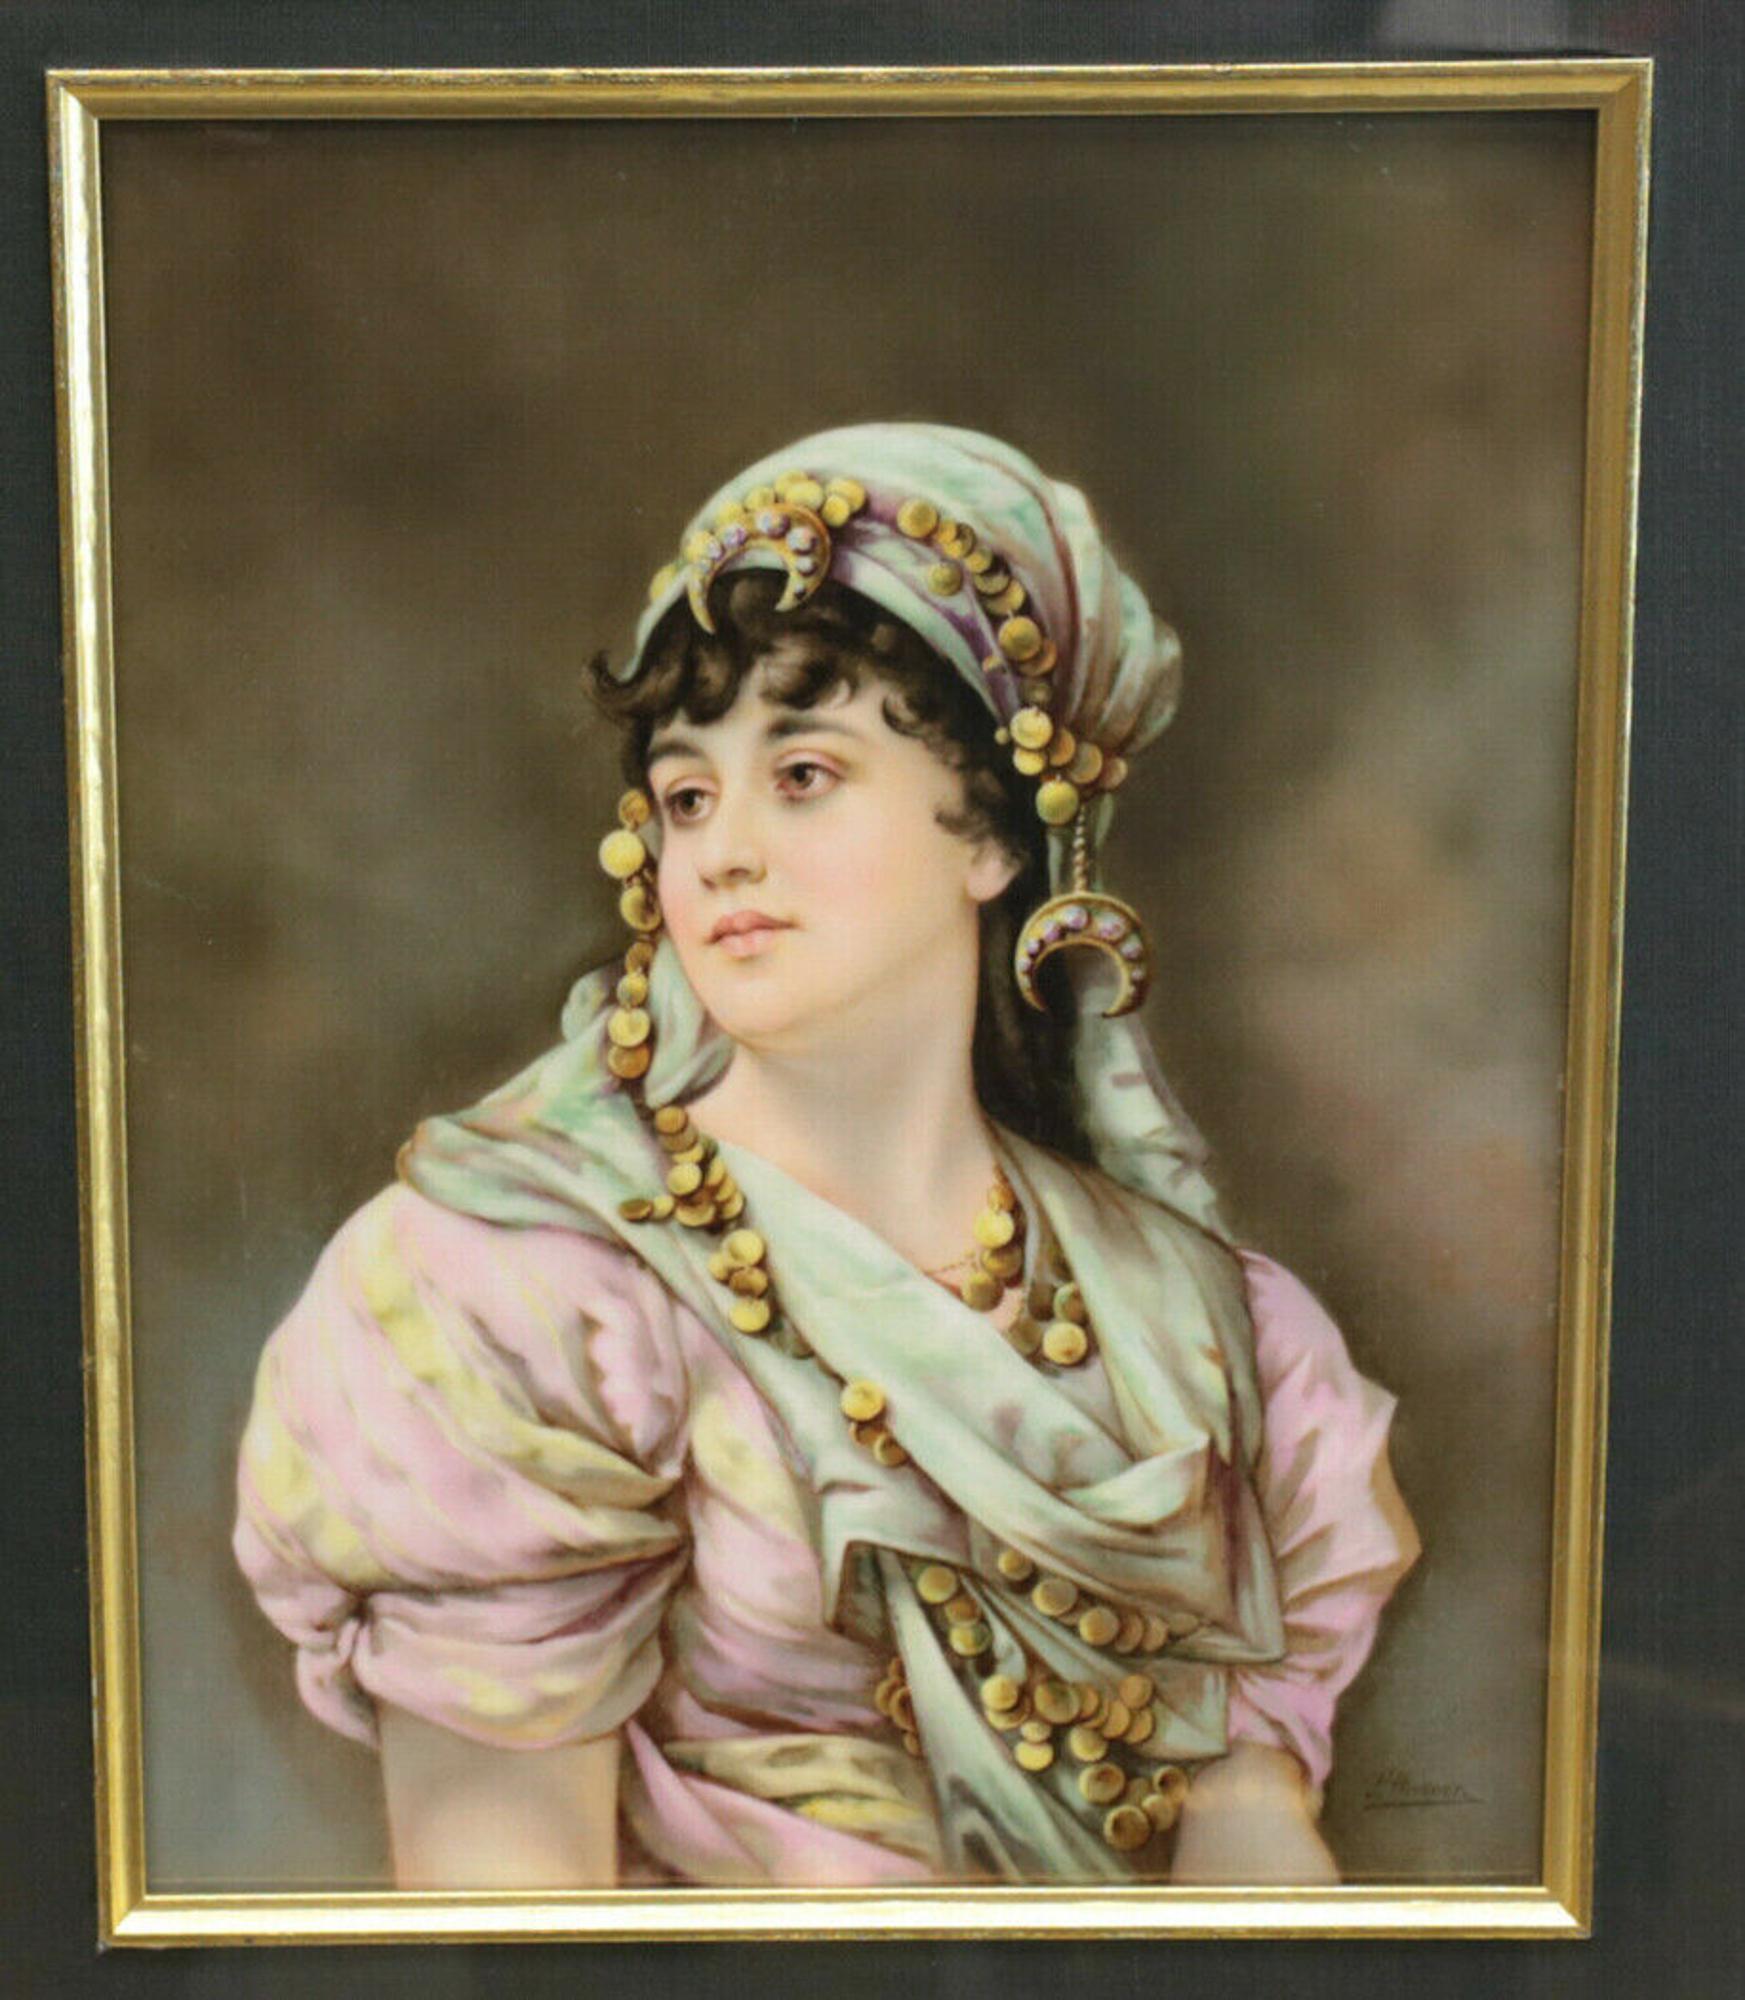 KPM hand painted porcelain figural plaque, 19th Century. The plaque depicts a profile portrait of a gypsy. Signed 